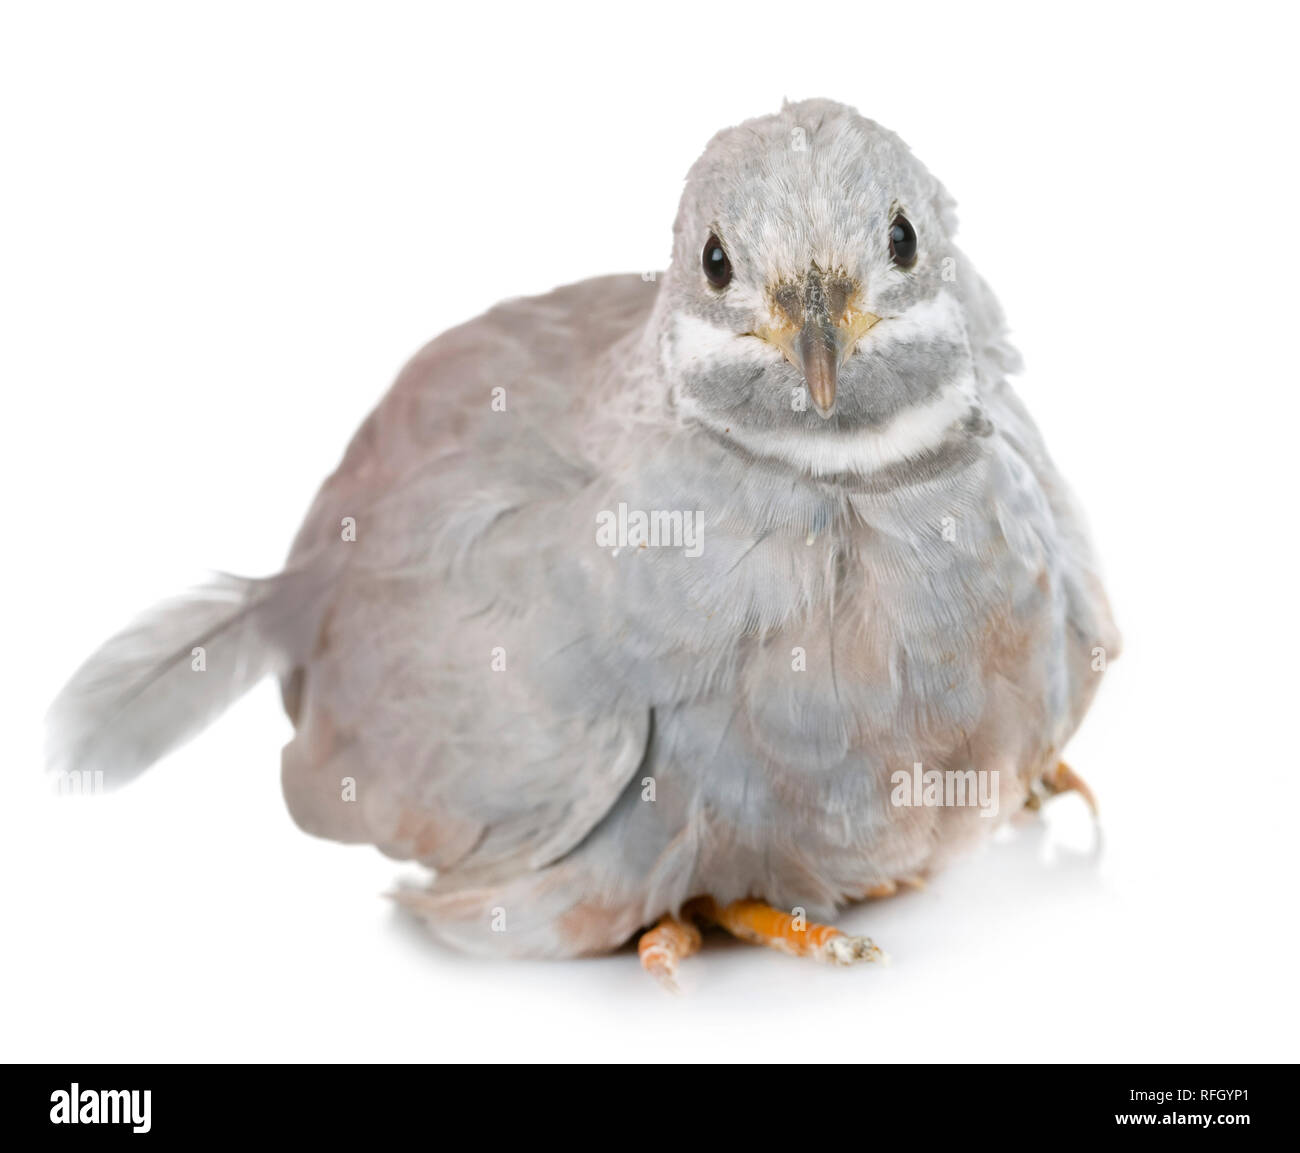 King quail in front of white background Stock Photo